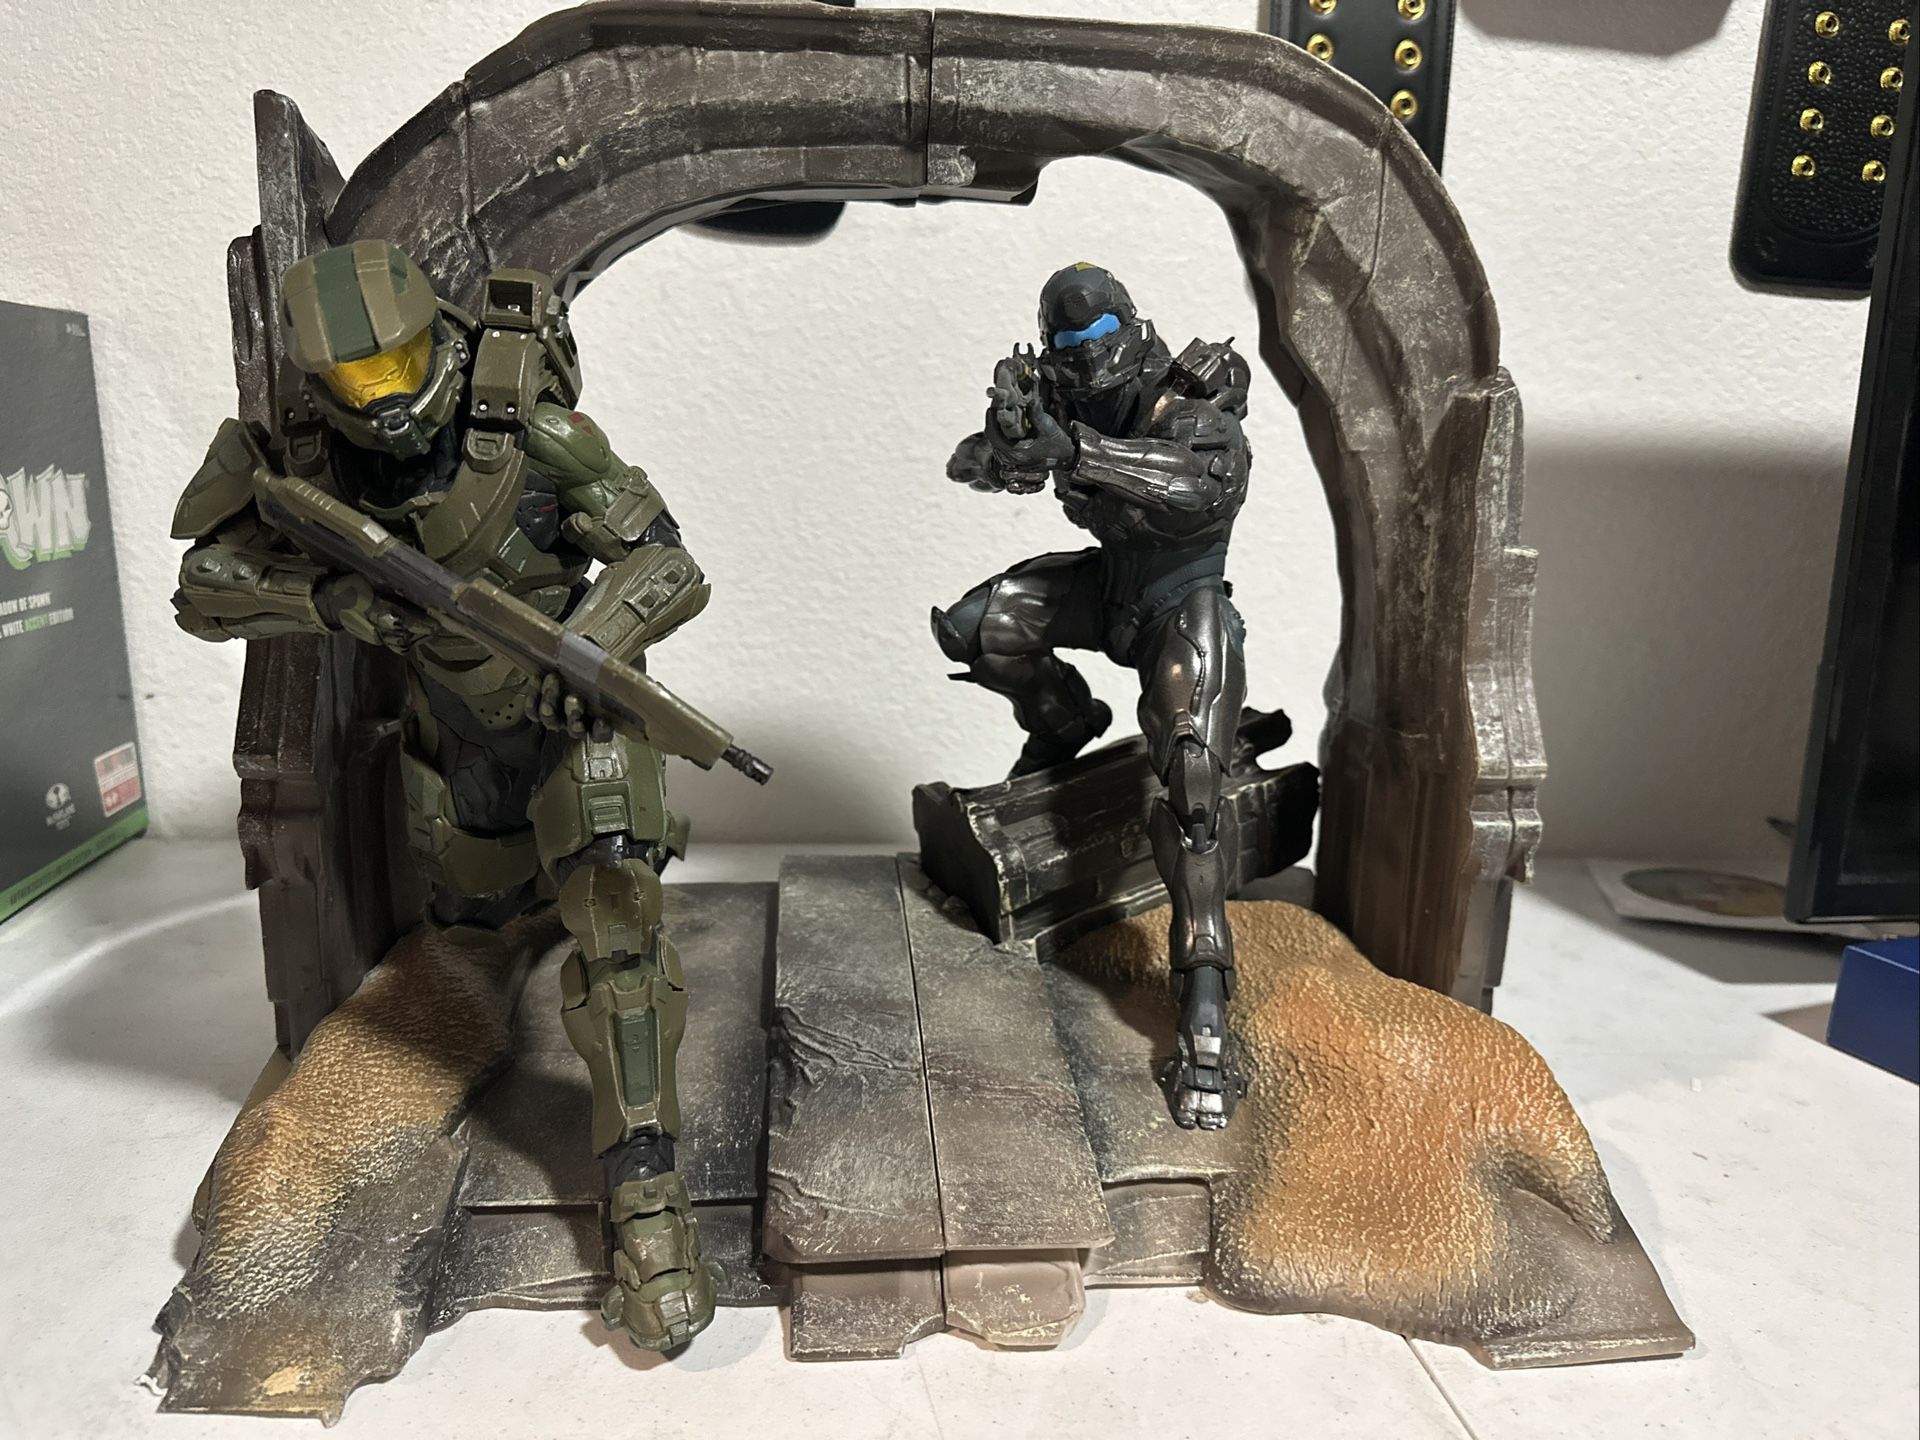 Halo 5 Guardians Limited Collector's Edition Master Chief & Spartan Locke Statue